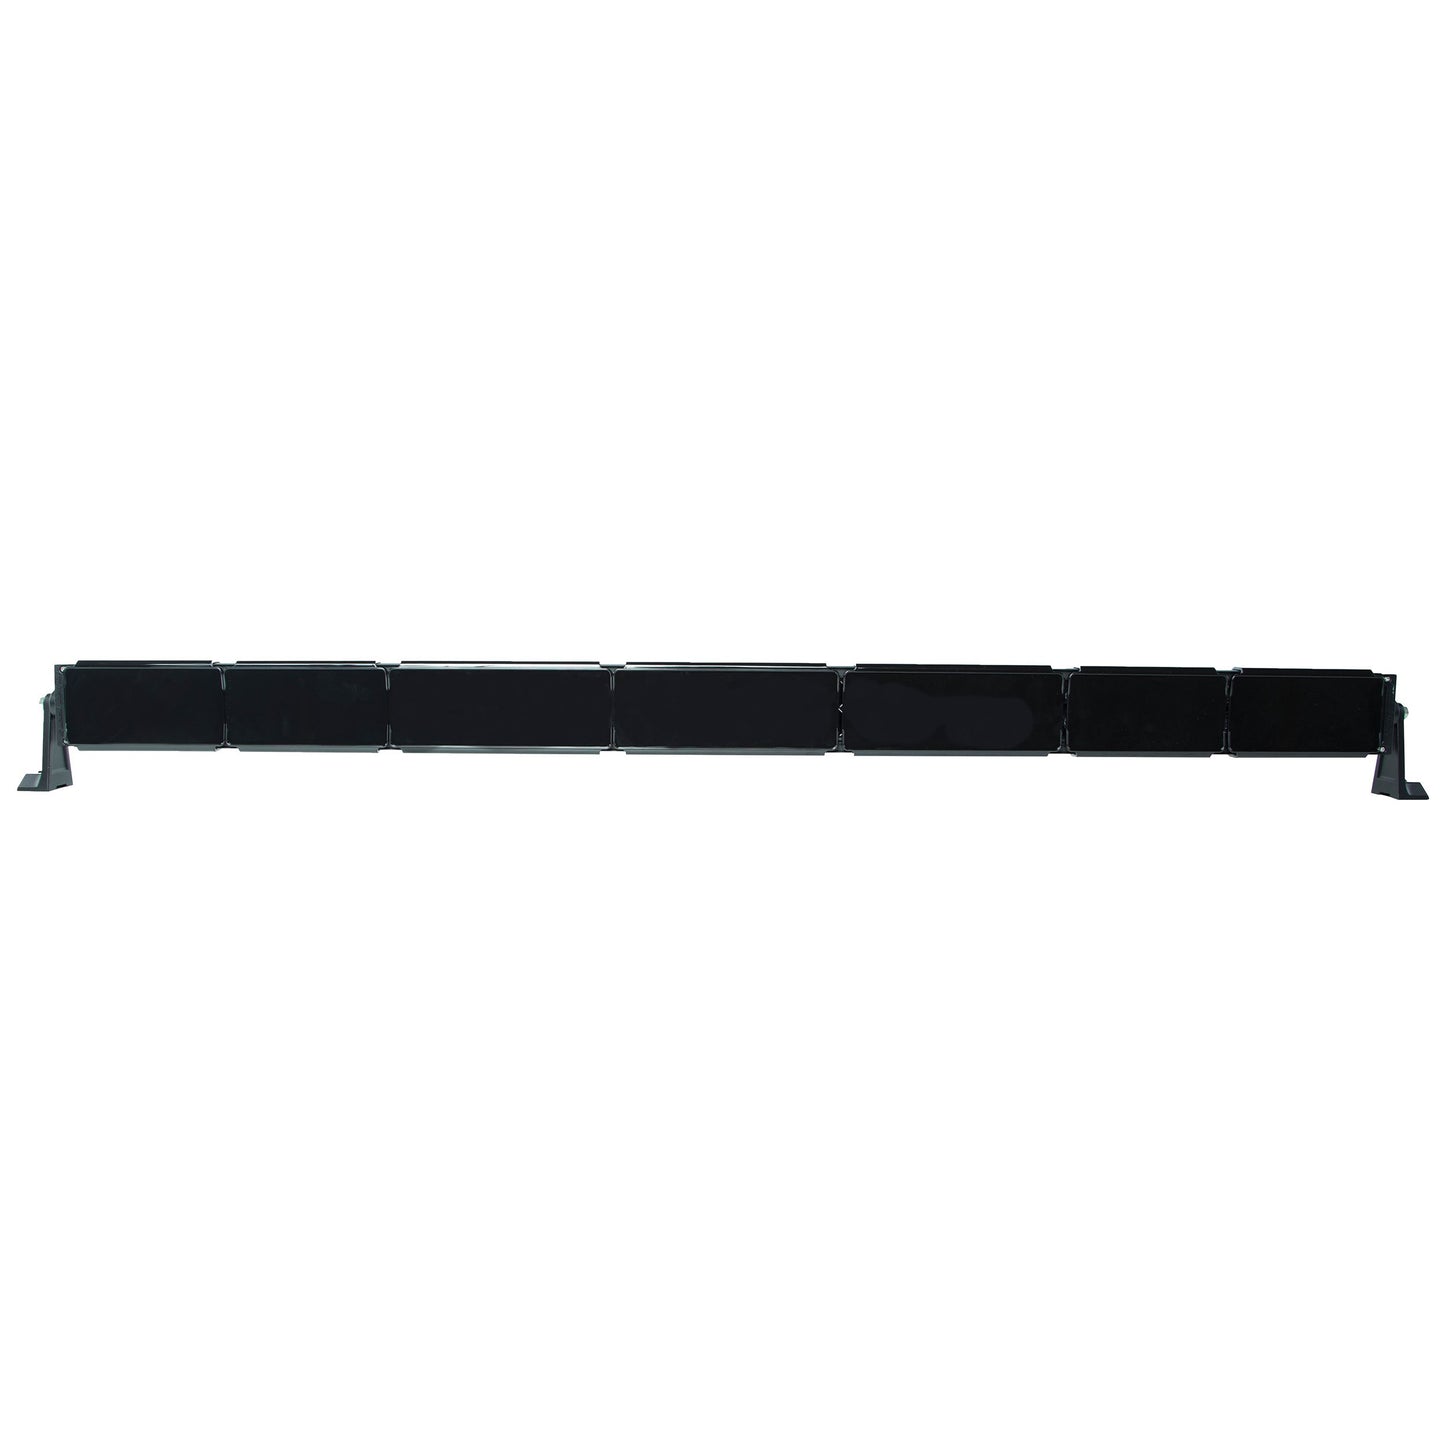 Light Covers for DRC, DRCX and Infinity Light Bars - 54" 10-30124/10-30125